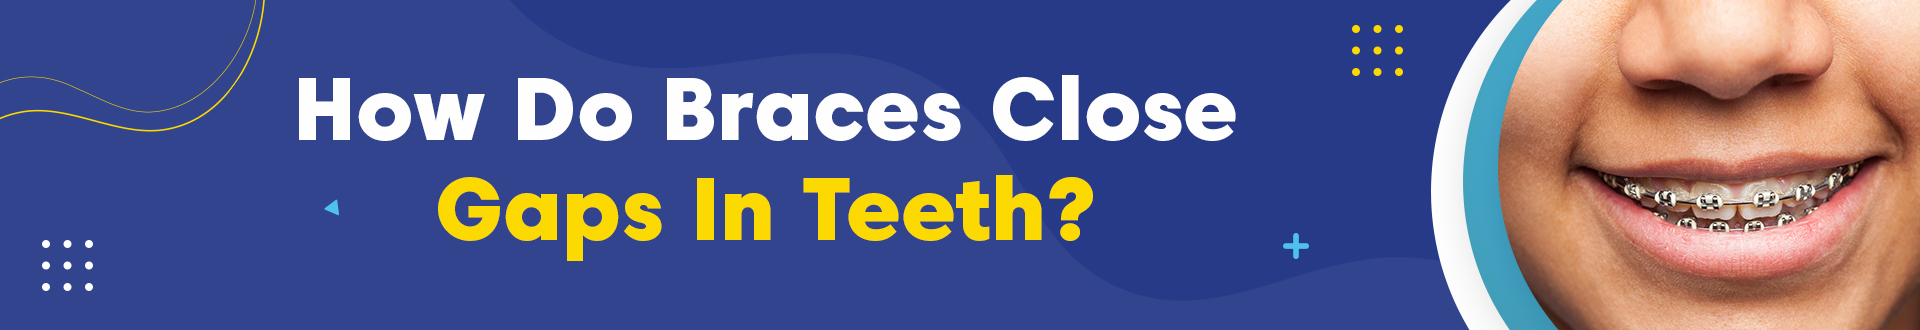 how to close gaps in teeth